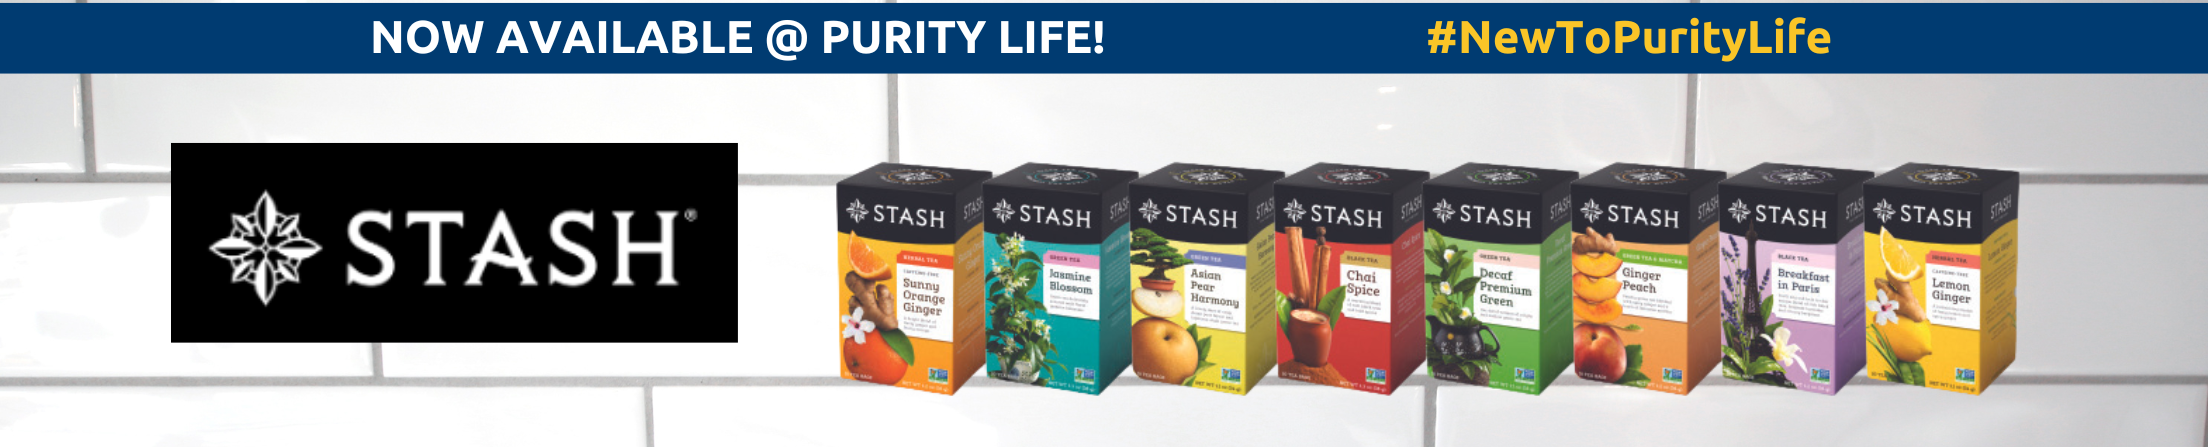 Stash NOW AVAILABLE @ PURITY LIFE!